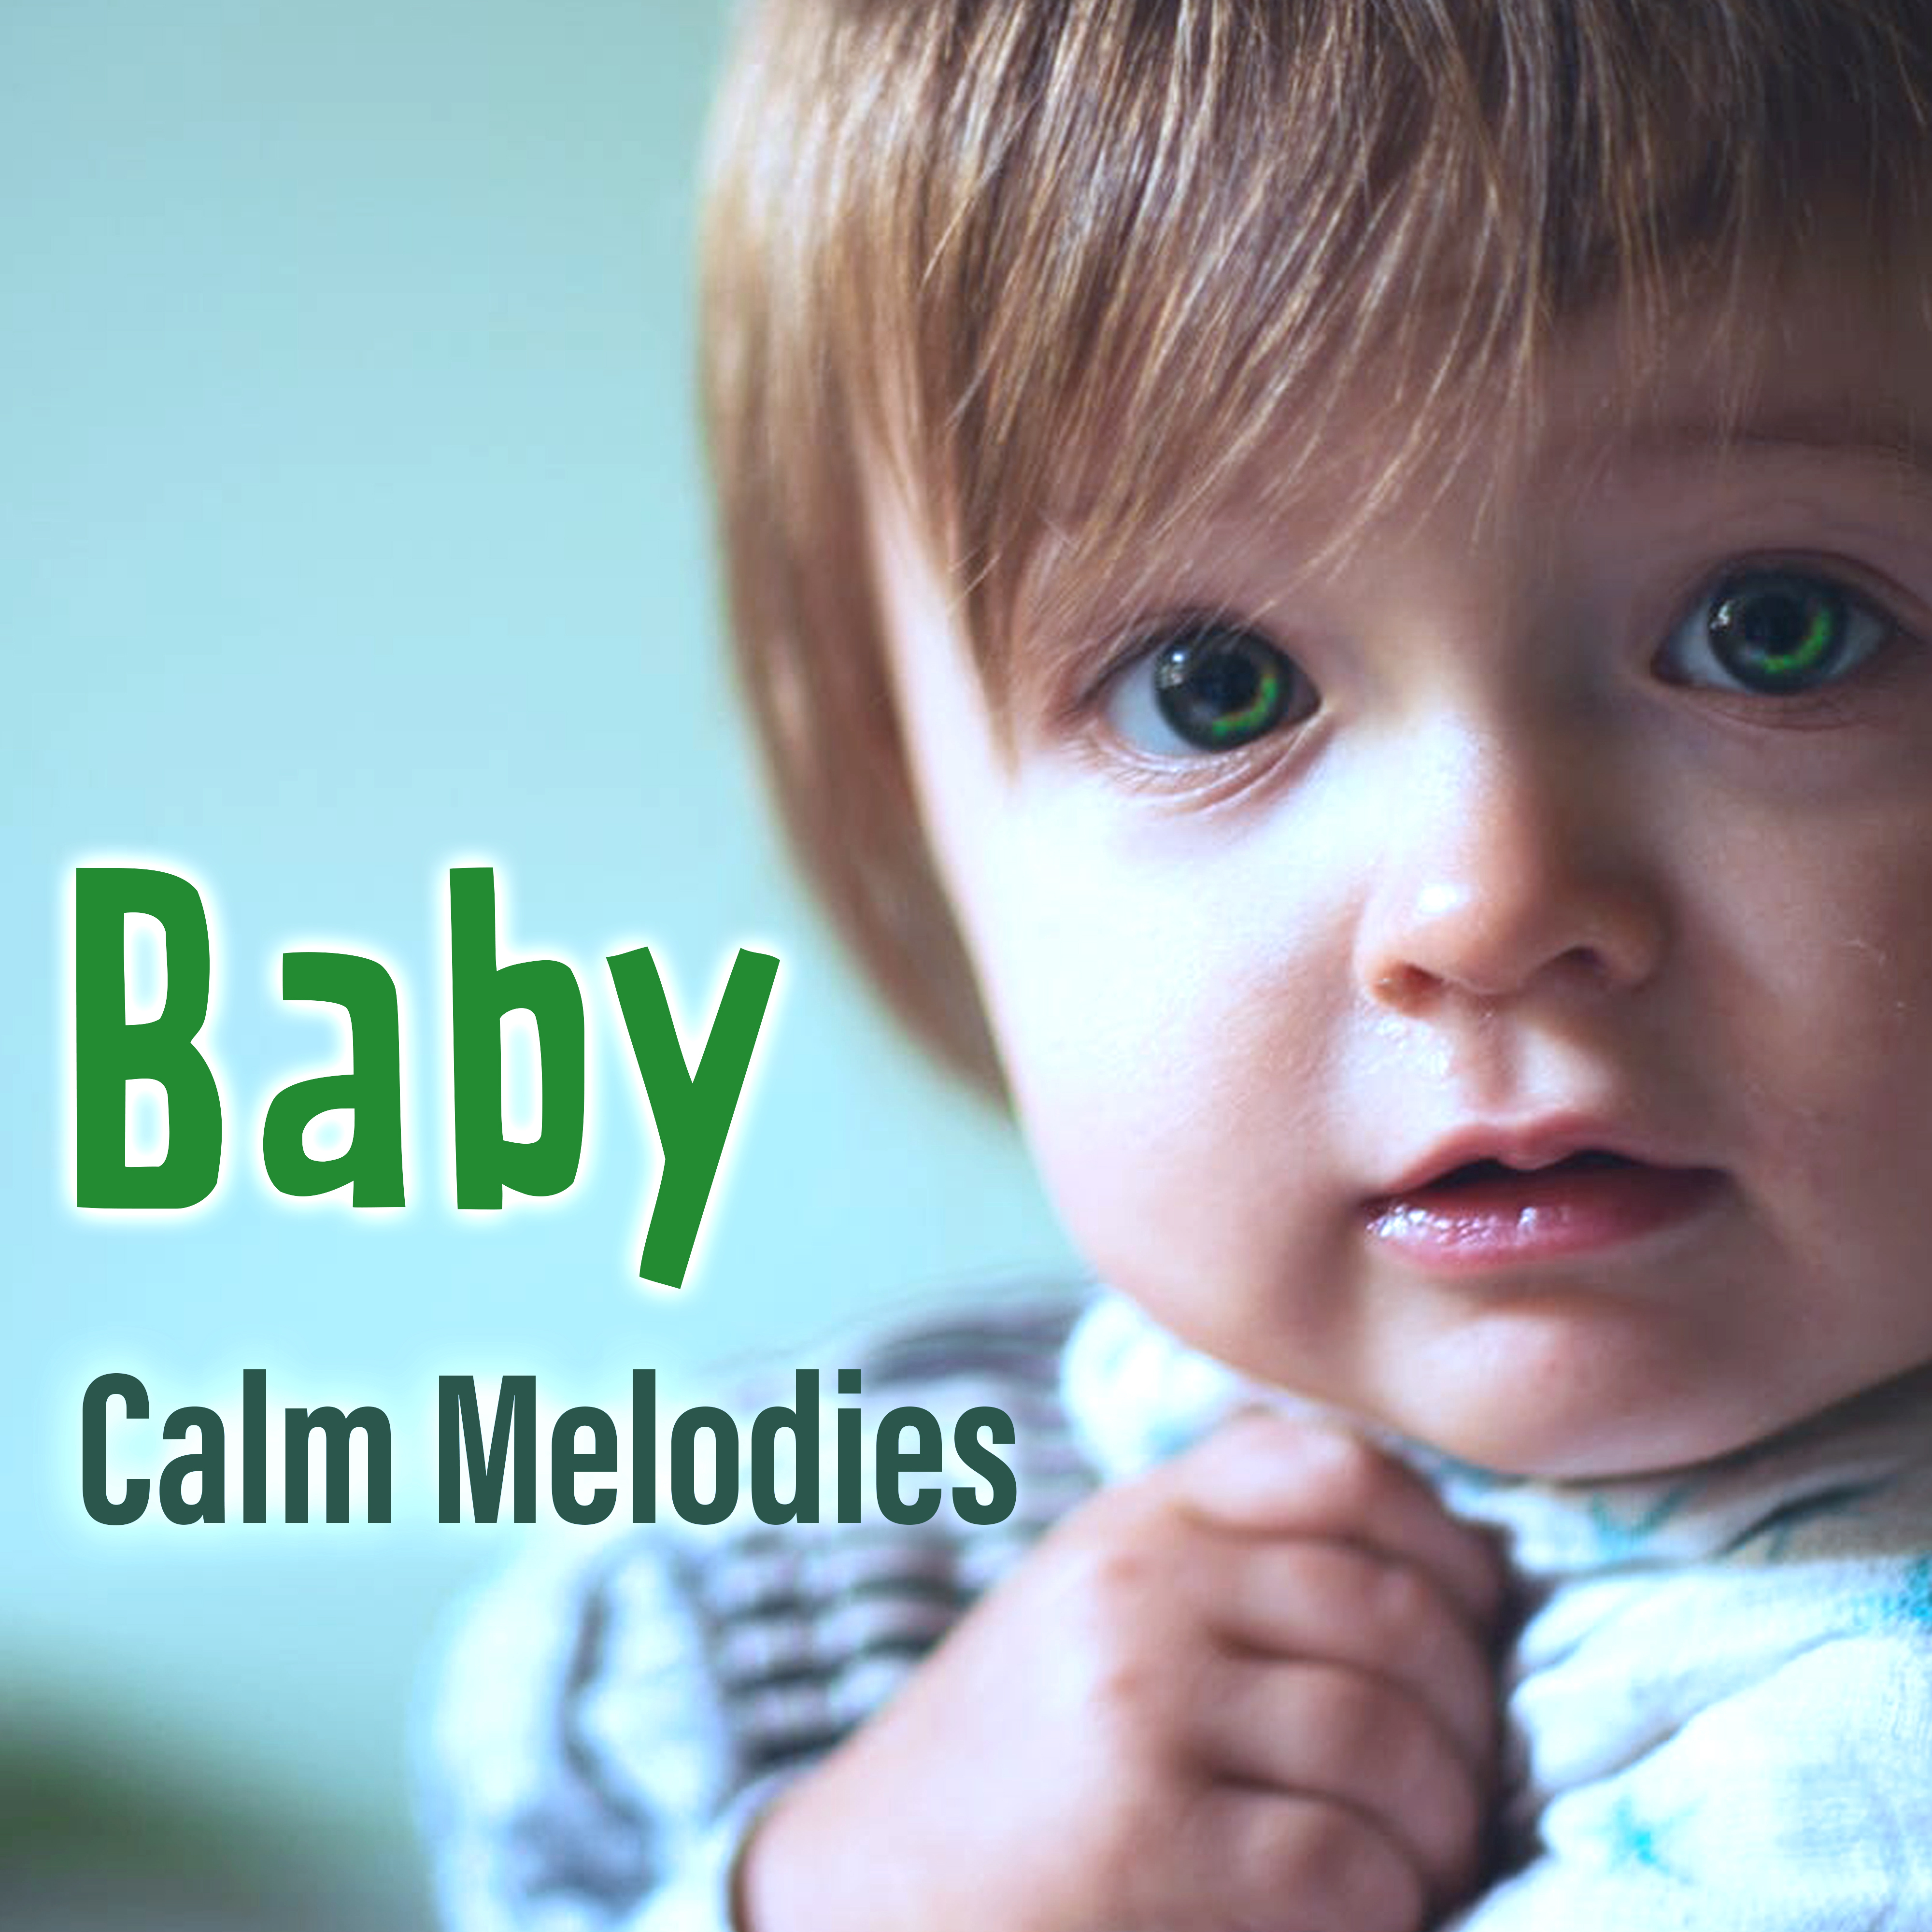 Baby Calm Melodies